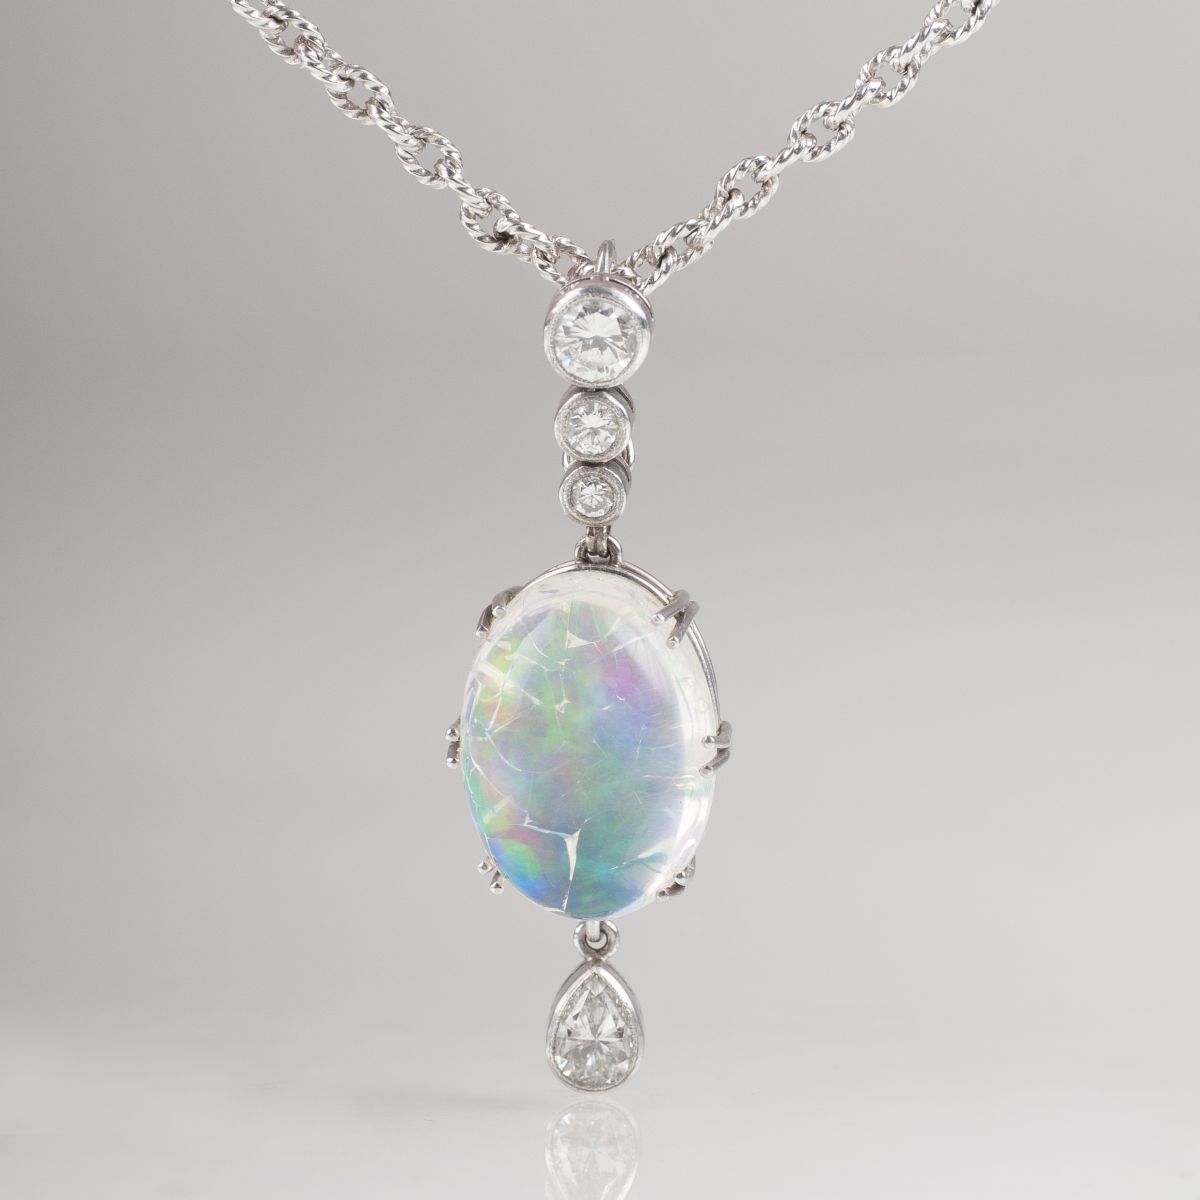 A diamond pendant with necklace